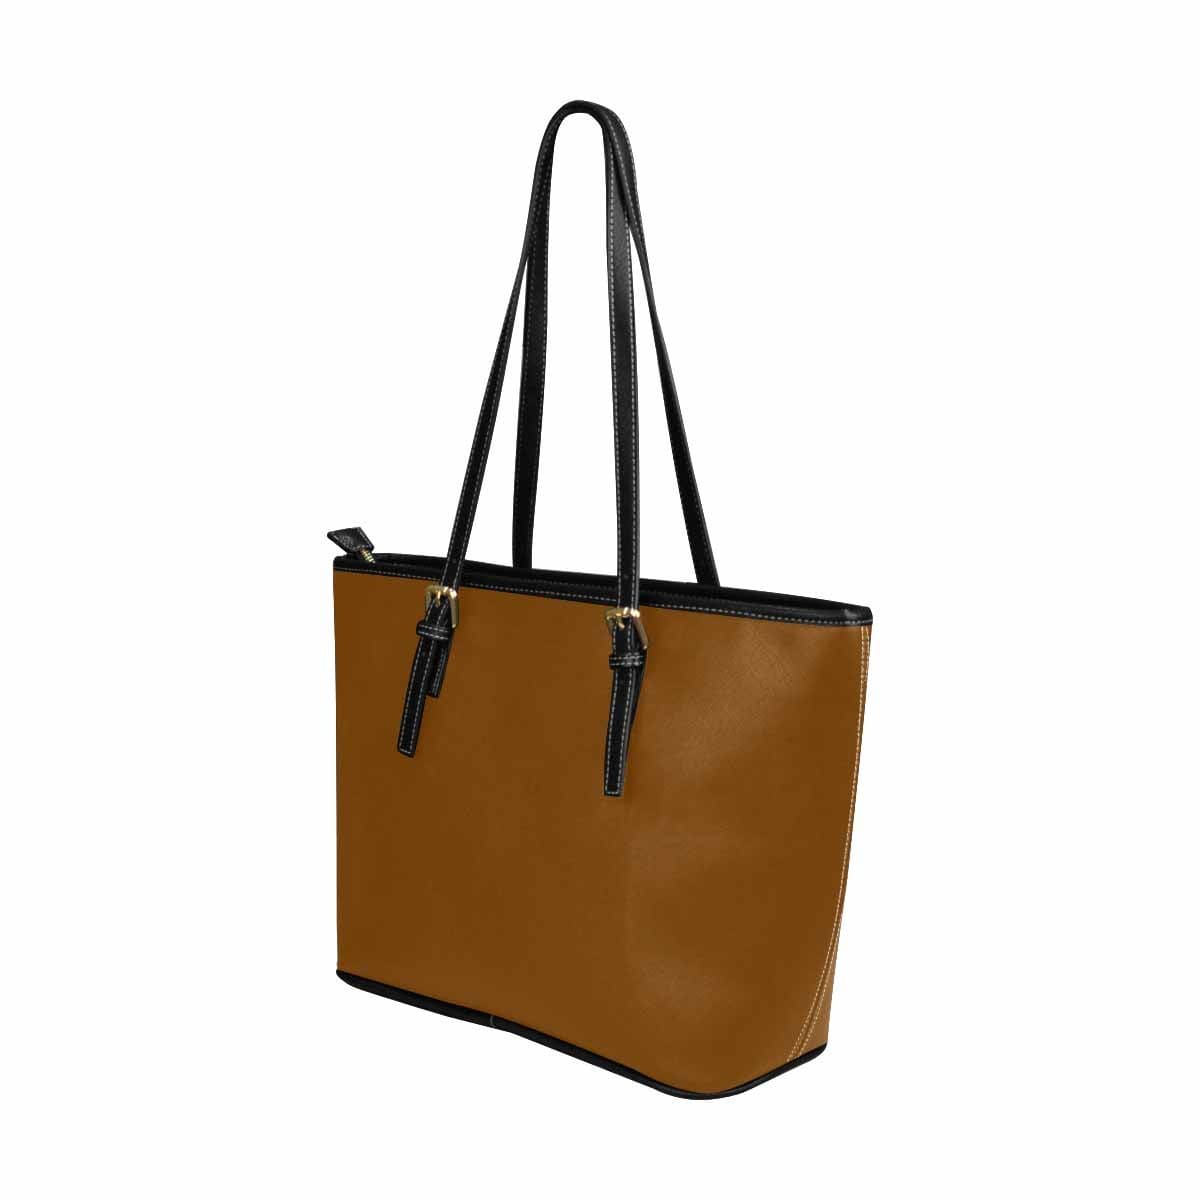 Large Leather Tote Shoulder Bag - Chocolate Brown - Bags | Leather Tote Bags